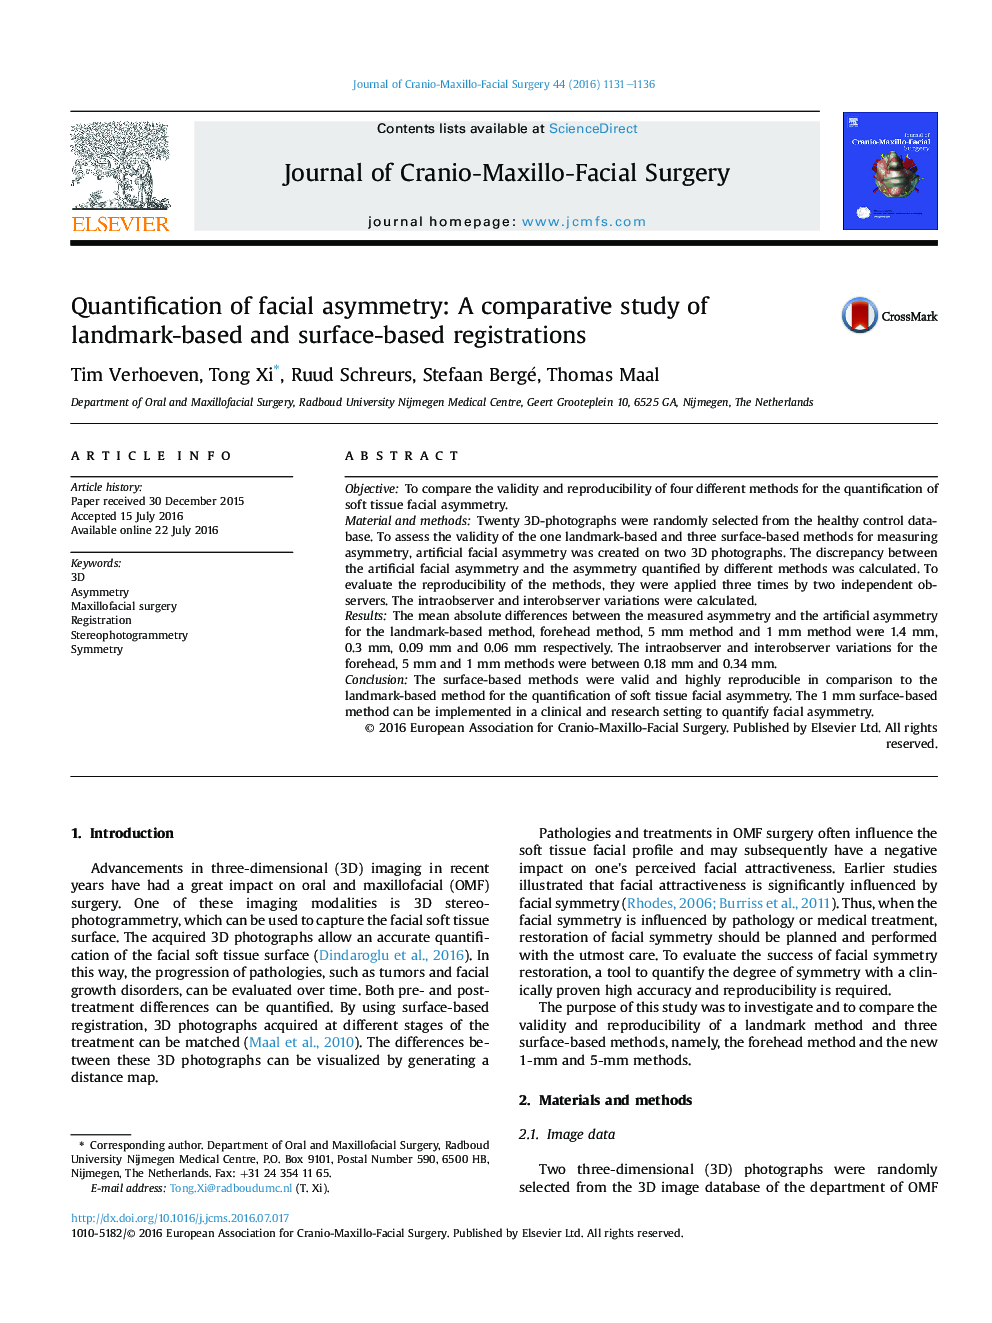 Quantification of facial asymmetry: A comparative study of landmark-based and surface-based registrations